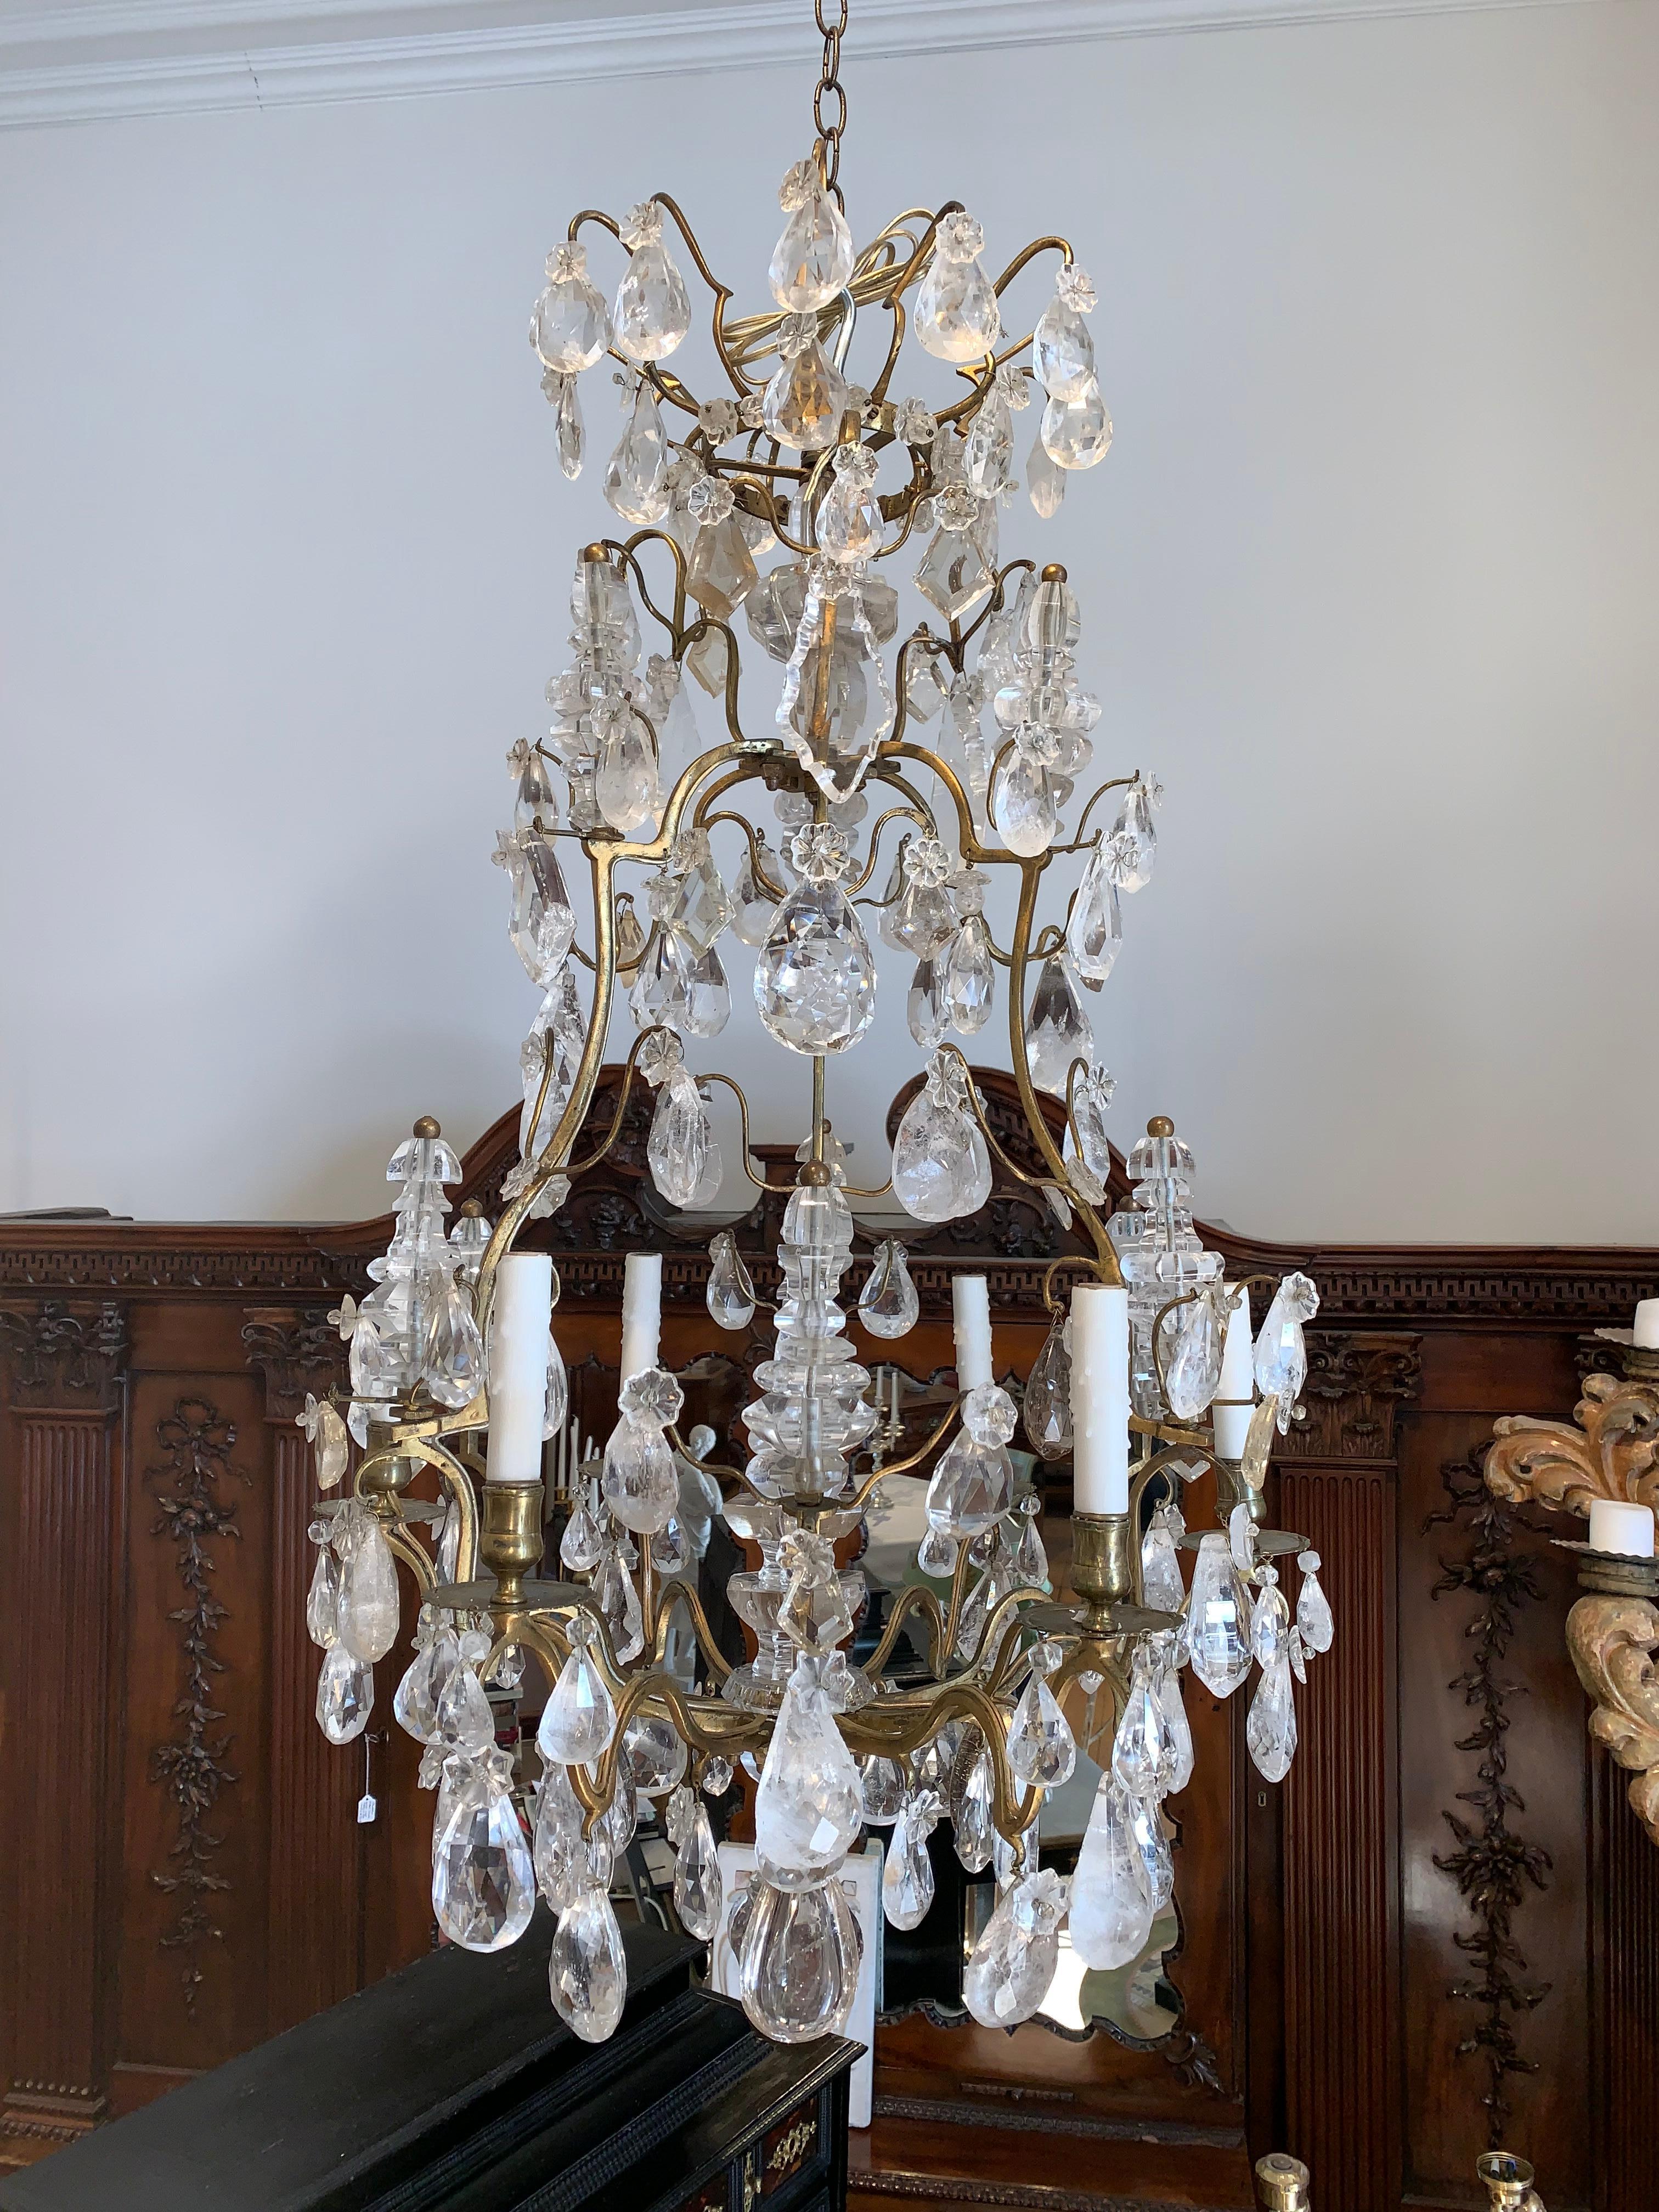 Period rock crystal chandelier of the mid-18th century.

With cage form and ALL prisms being French high clarity rock crystal--mostly original to the piece. All elements including towers
or spires in rock crystal as well. French wired recently